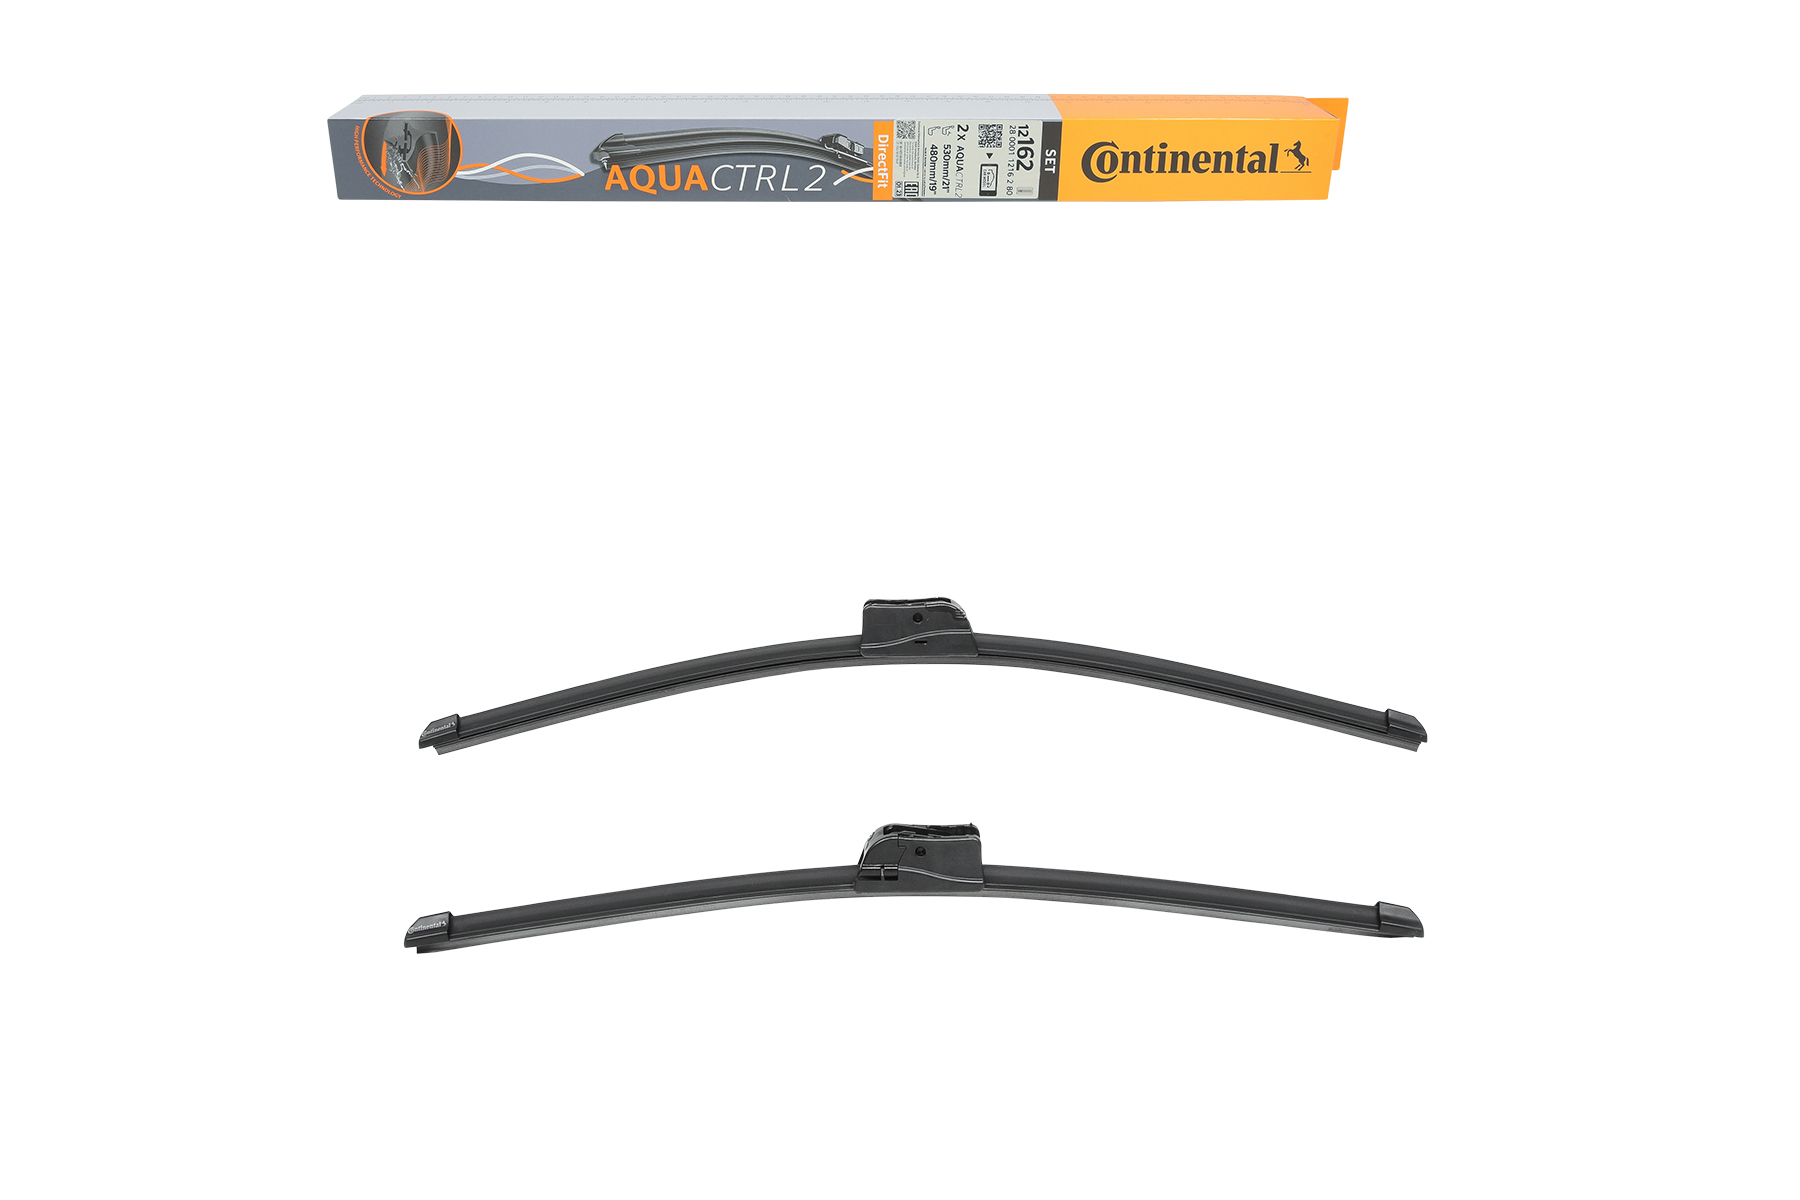 Continental AQUACTRL2 2800011216280 Wiper blade 530, 480 mm Front, Flat wiper blade, with spoiler, 21/19 Inch